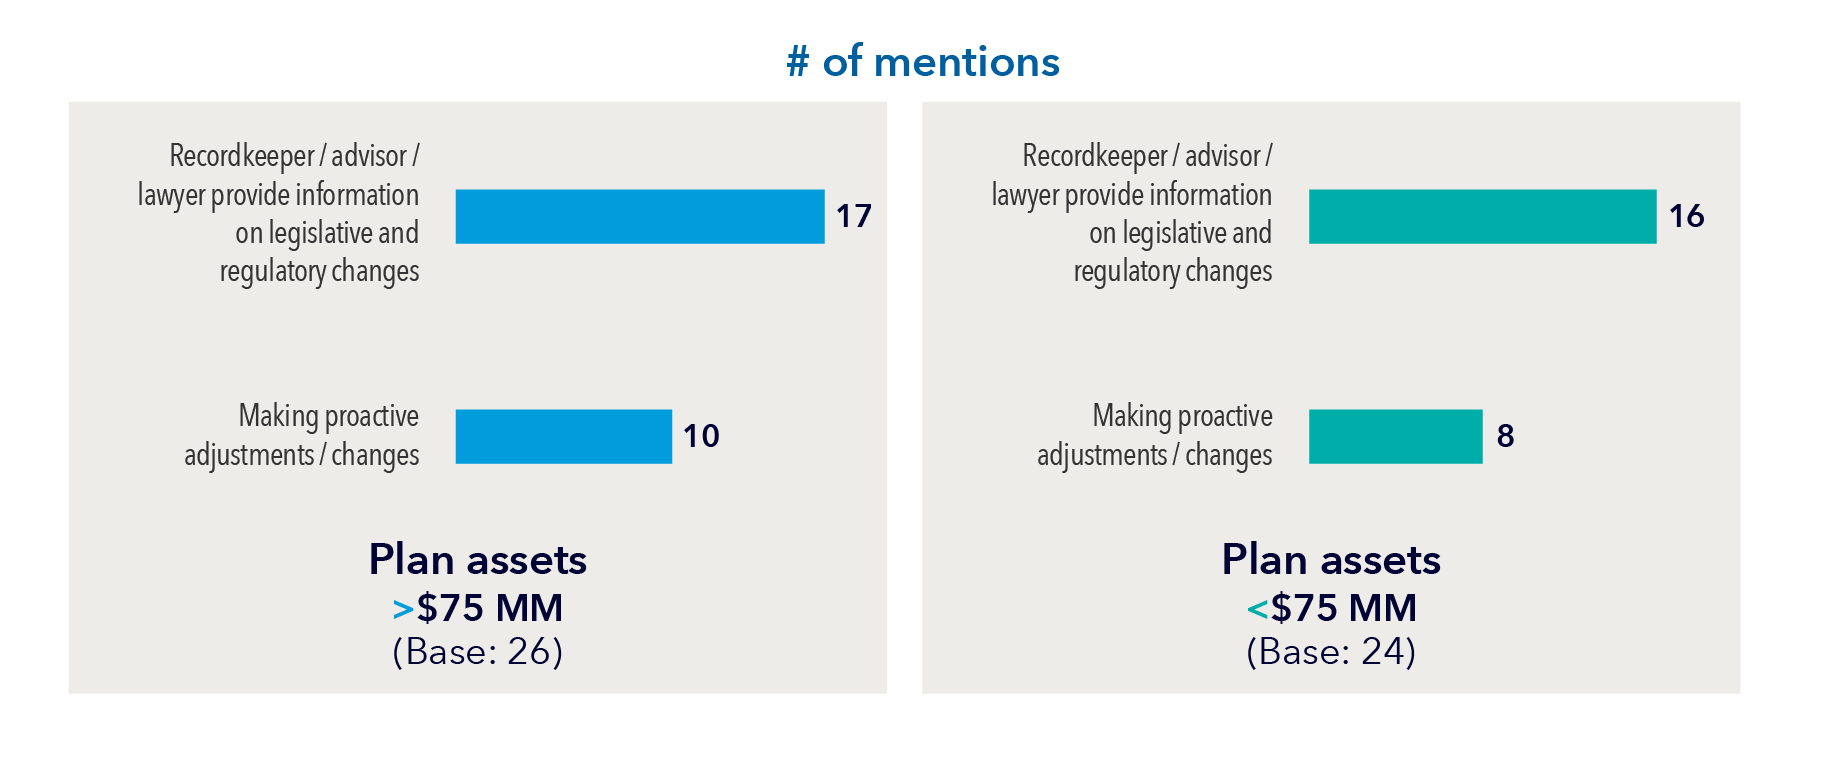 The charts above show that plan sponsors rely on third parties to provide information on potential legislative and regulatory changes. The chart on the left represents plans with greater than $75 million in assets, with 17 of 26 respondents mentioning that a recordkeeper/advisor/lawyer provides information on legislative and regulatory changes and 10 mentioning they make proactive adjustments/changes. The chart on the right represents plans with less than $75 million in assets, with 16 of 24 respondents mentioning that a recordkeeper/advisor/lawyer provides information on legislative and regulatory changes and 8 mentioning they make proactive adjustments/changes.